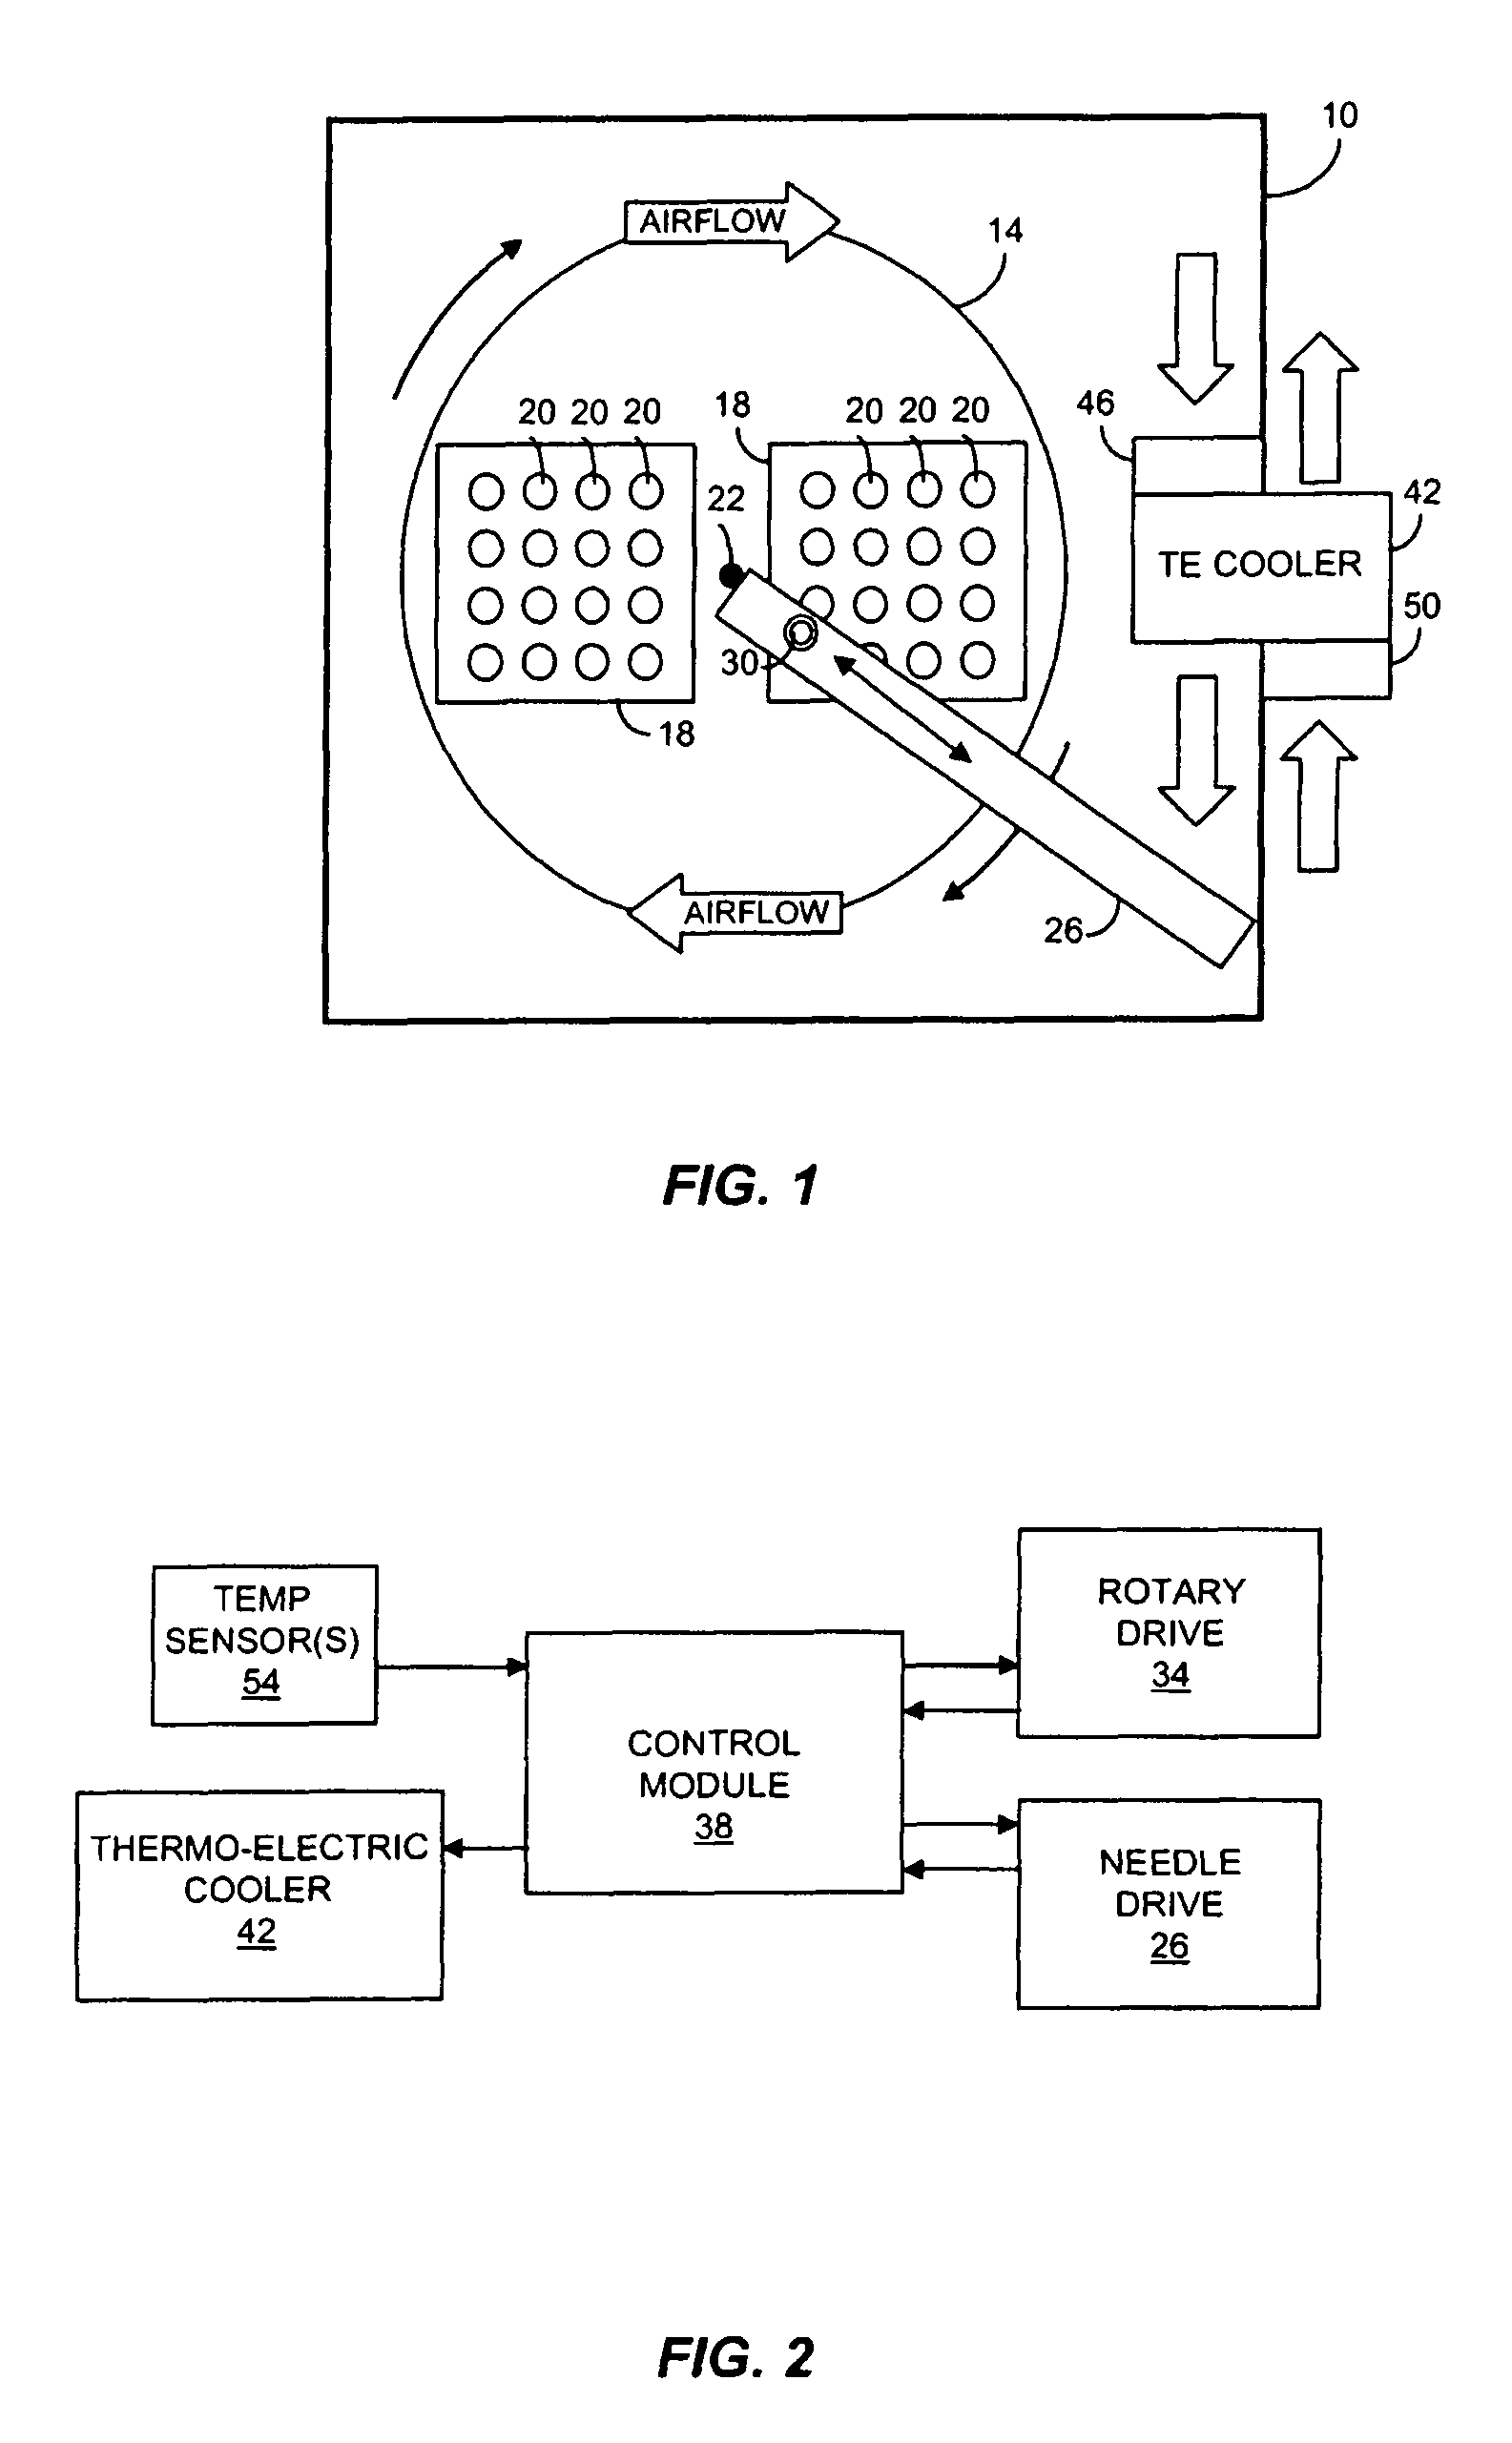 Apparatus for reducing variation in sample temperatures in a liquid chromatography system